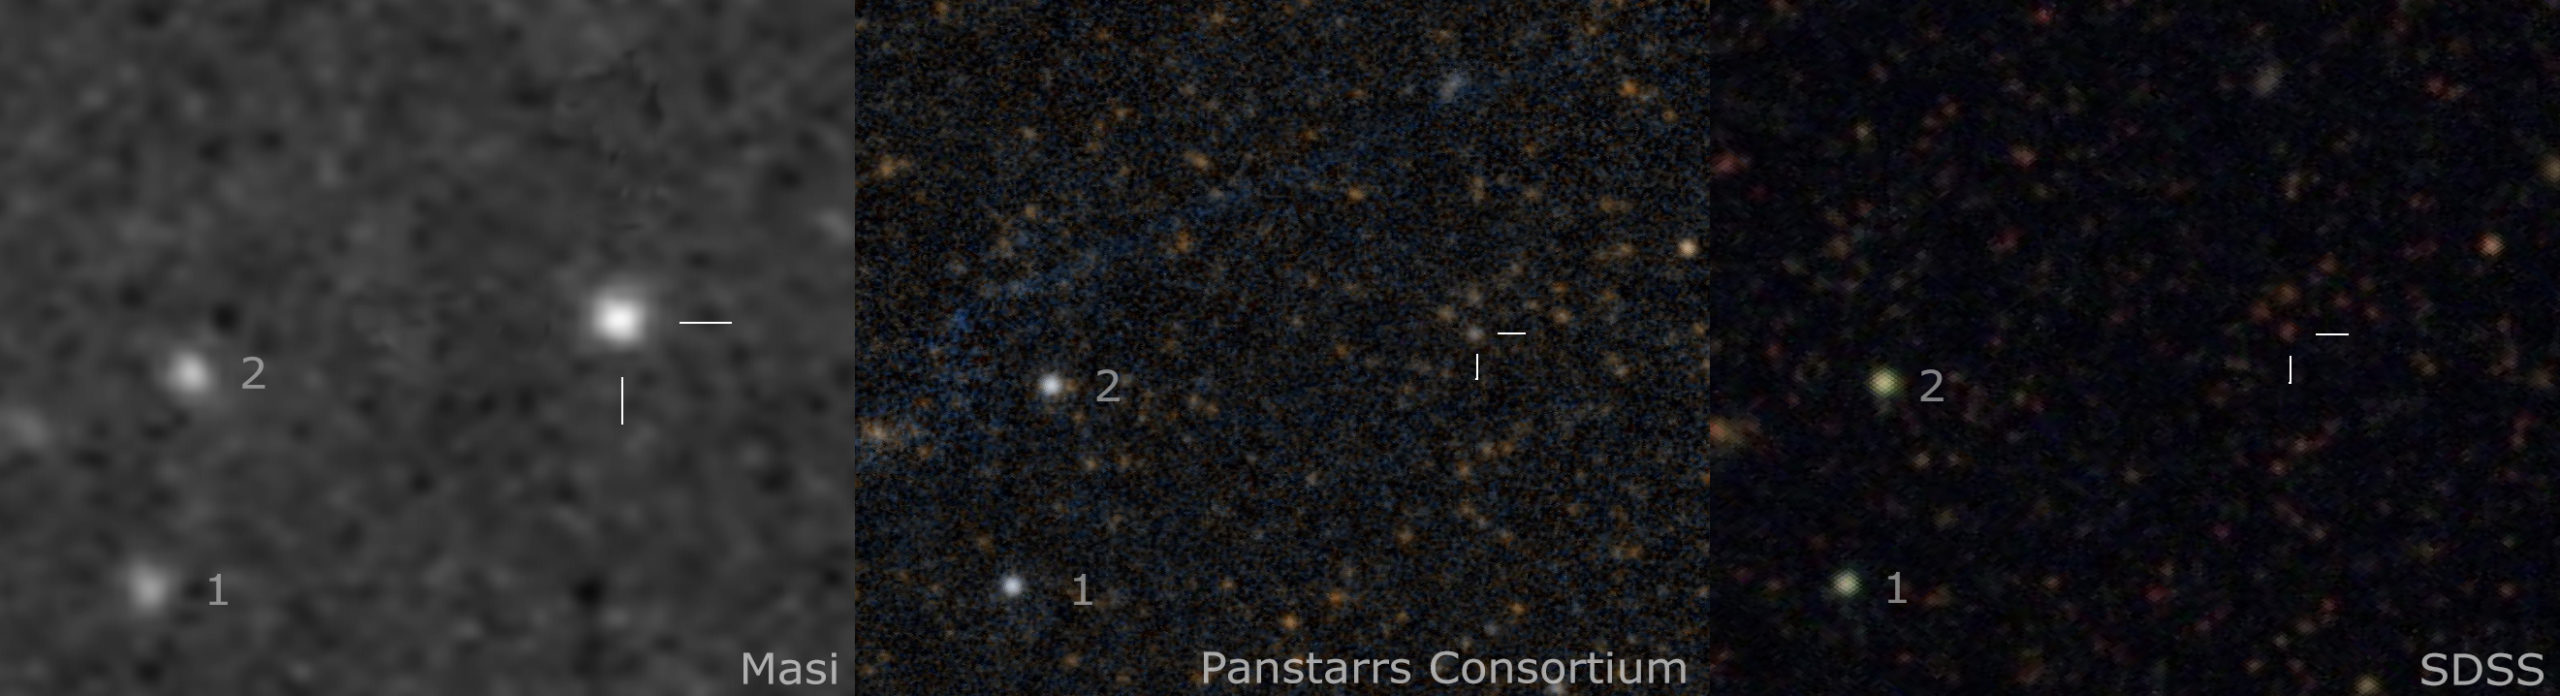 The source in our recent data vs Panstarss and SDSS archive data